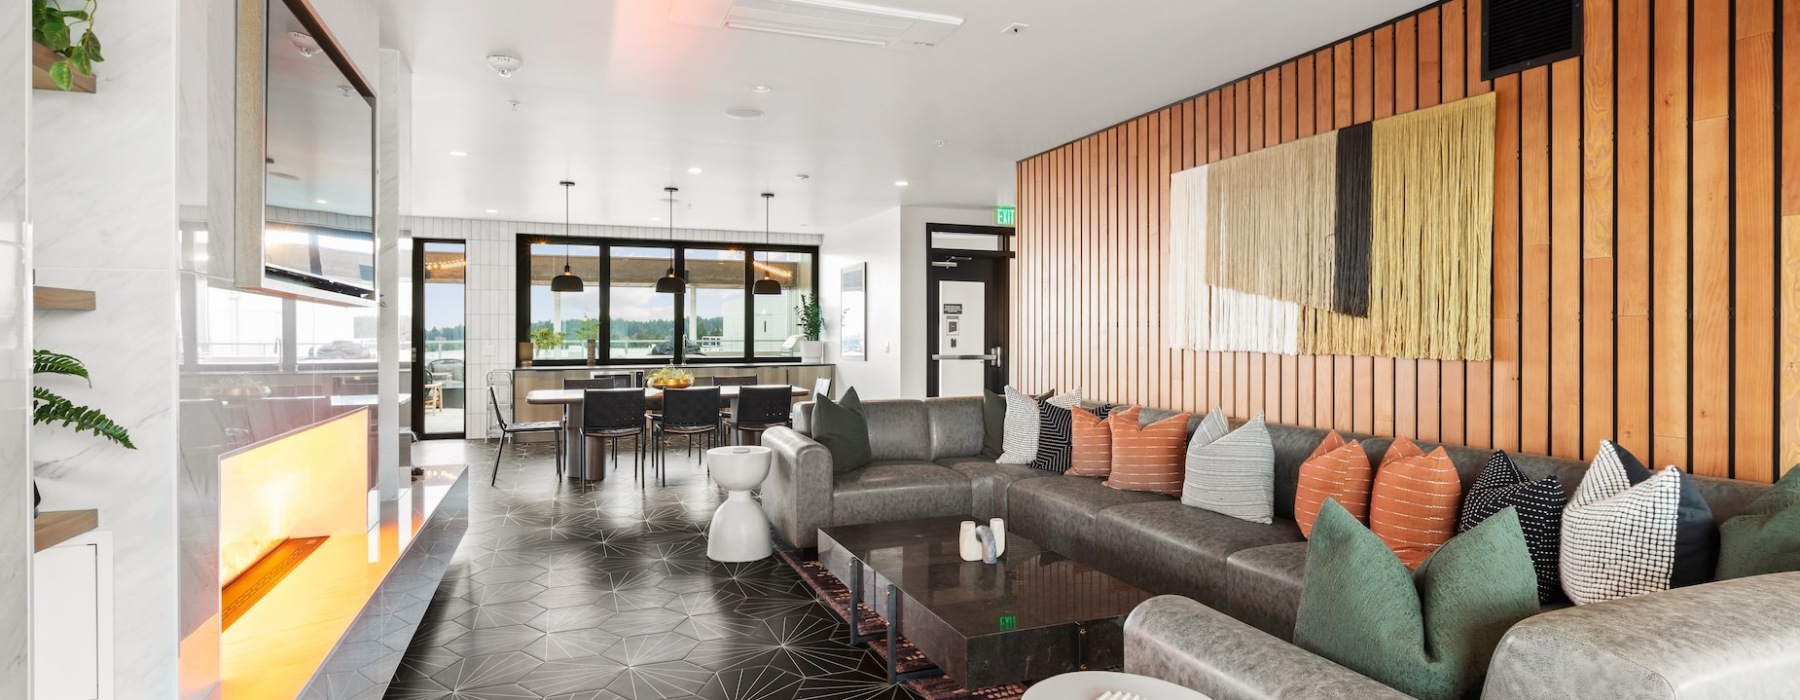 Resident lounge with seating, large screen TV, billiards and access to rooftop terrace.